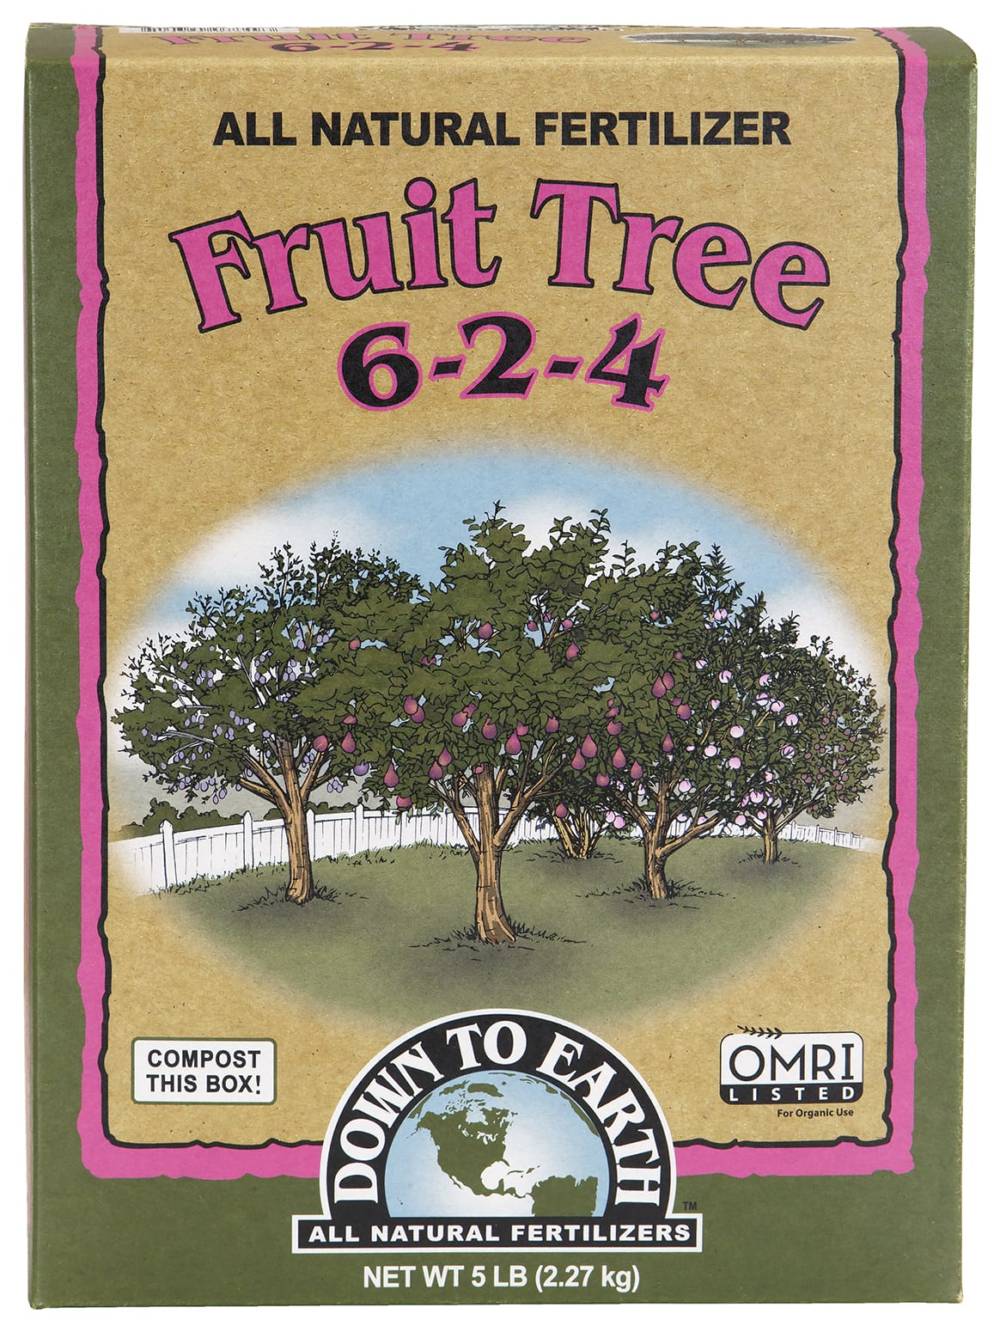 Box of Down To Earth Fruit Tree